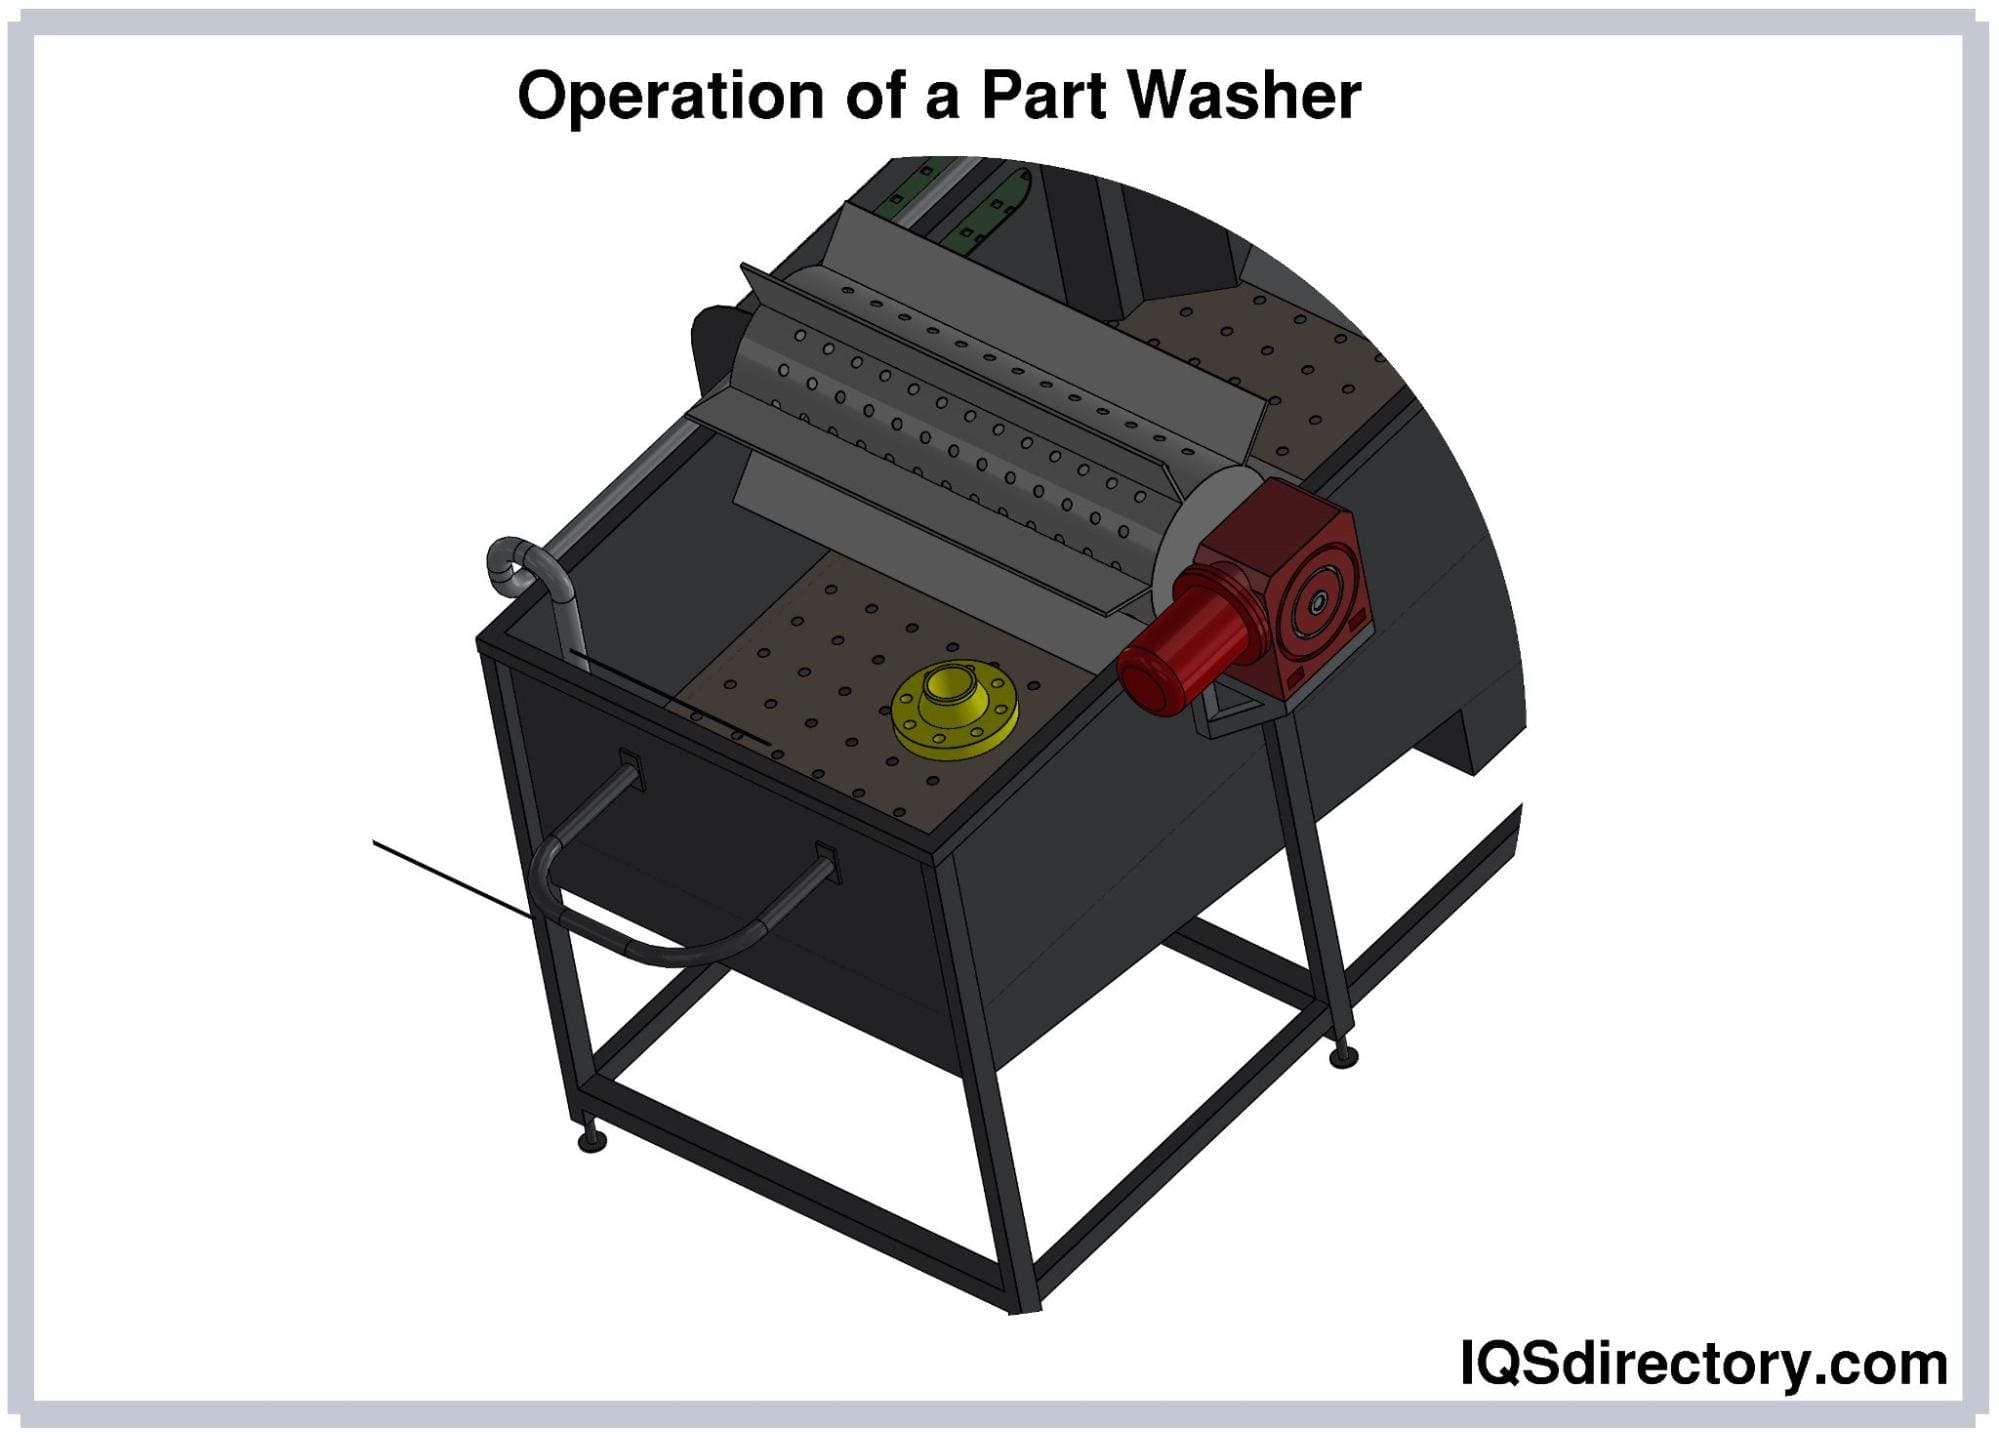 Operation of a Part Washer